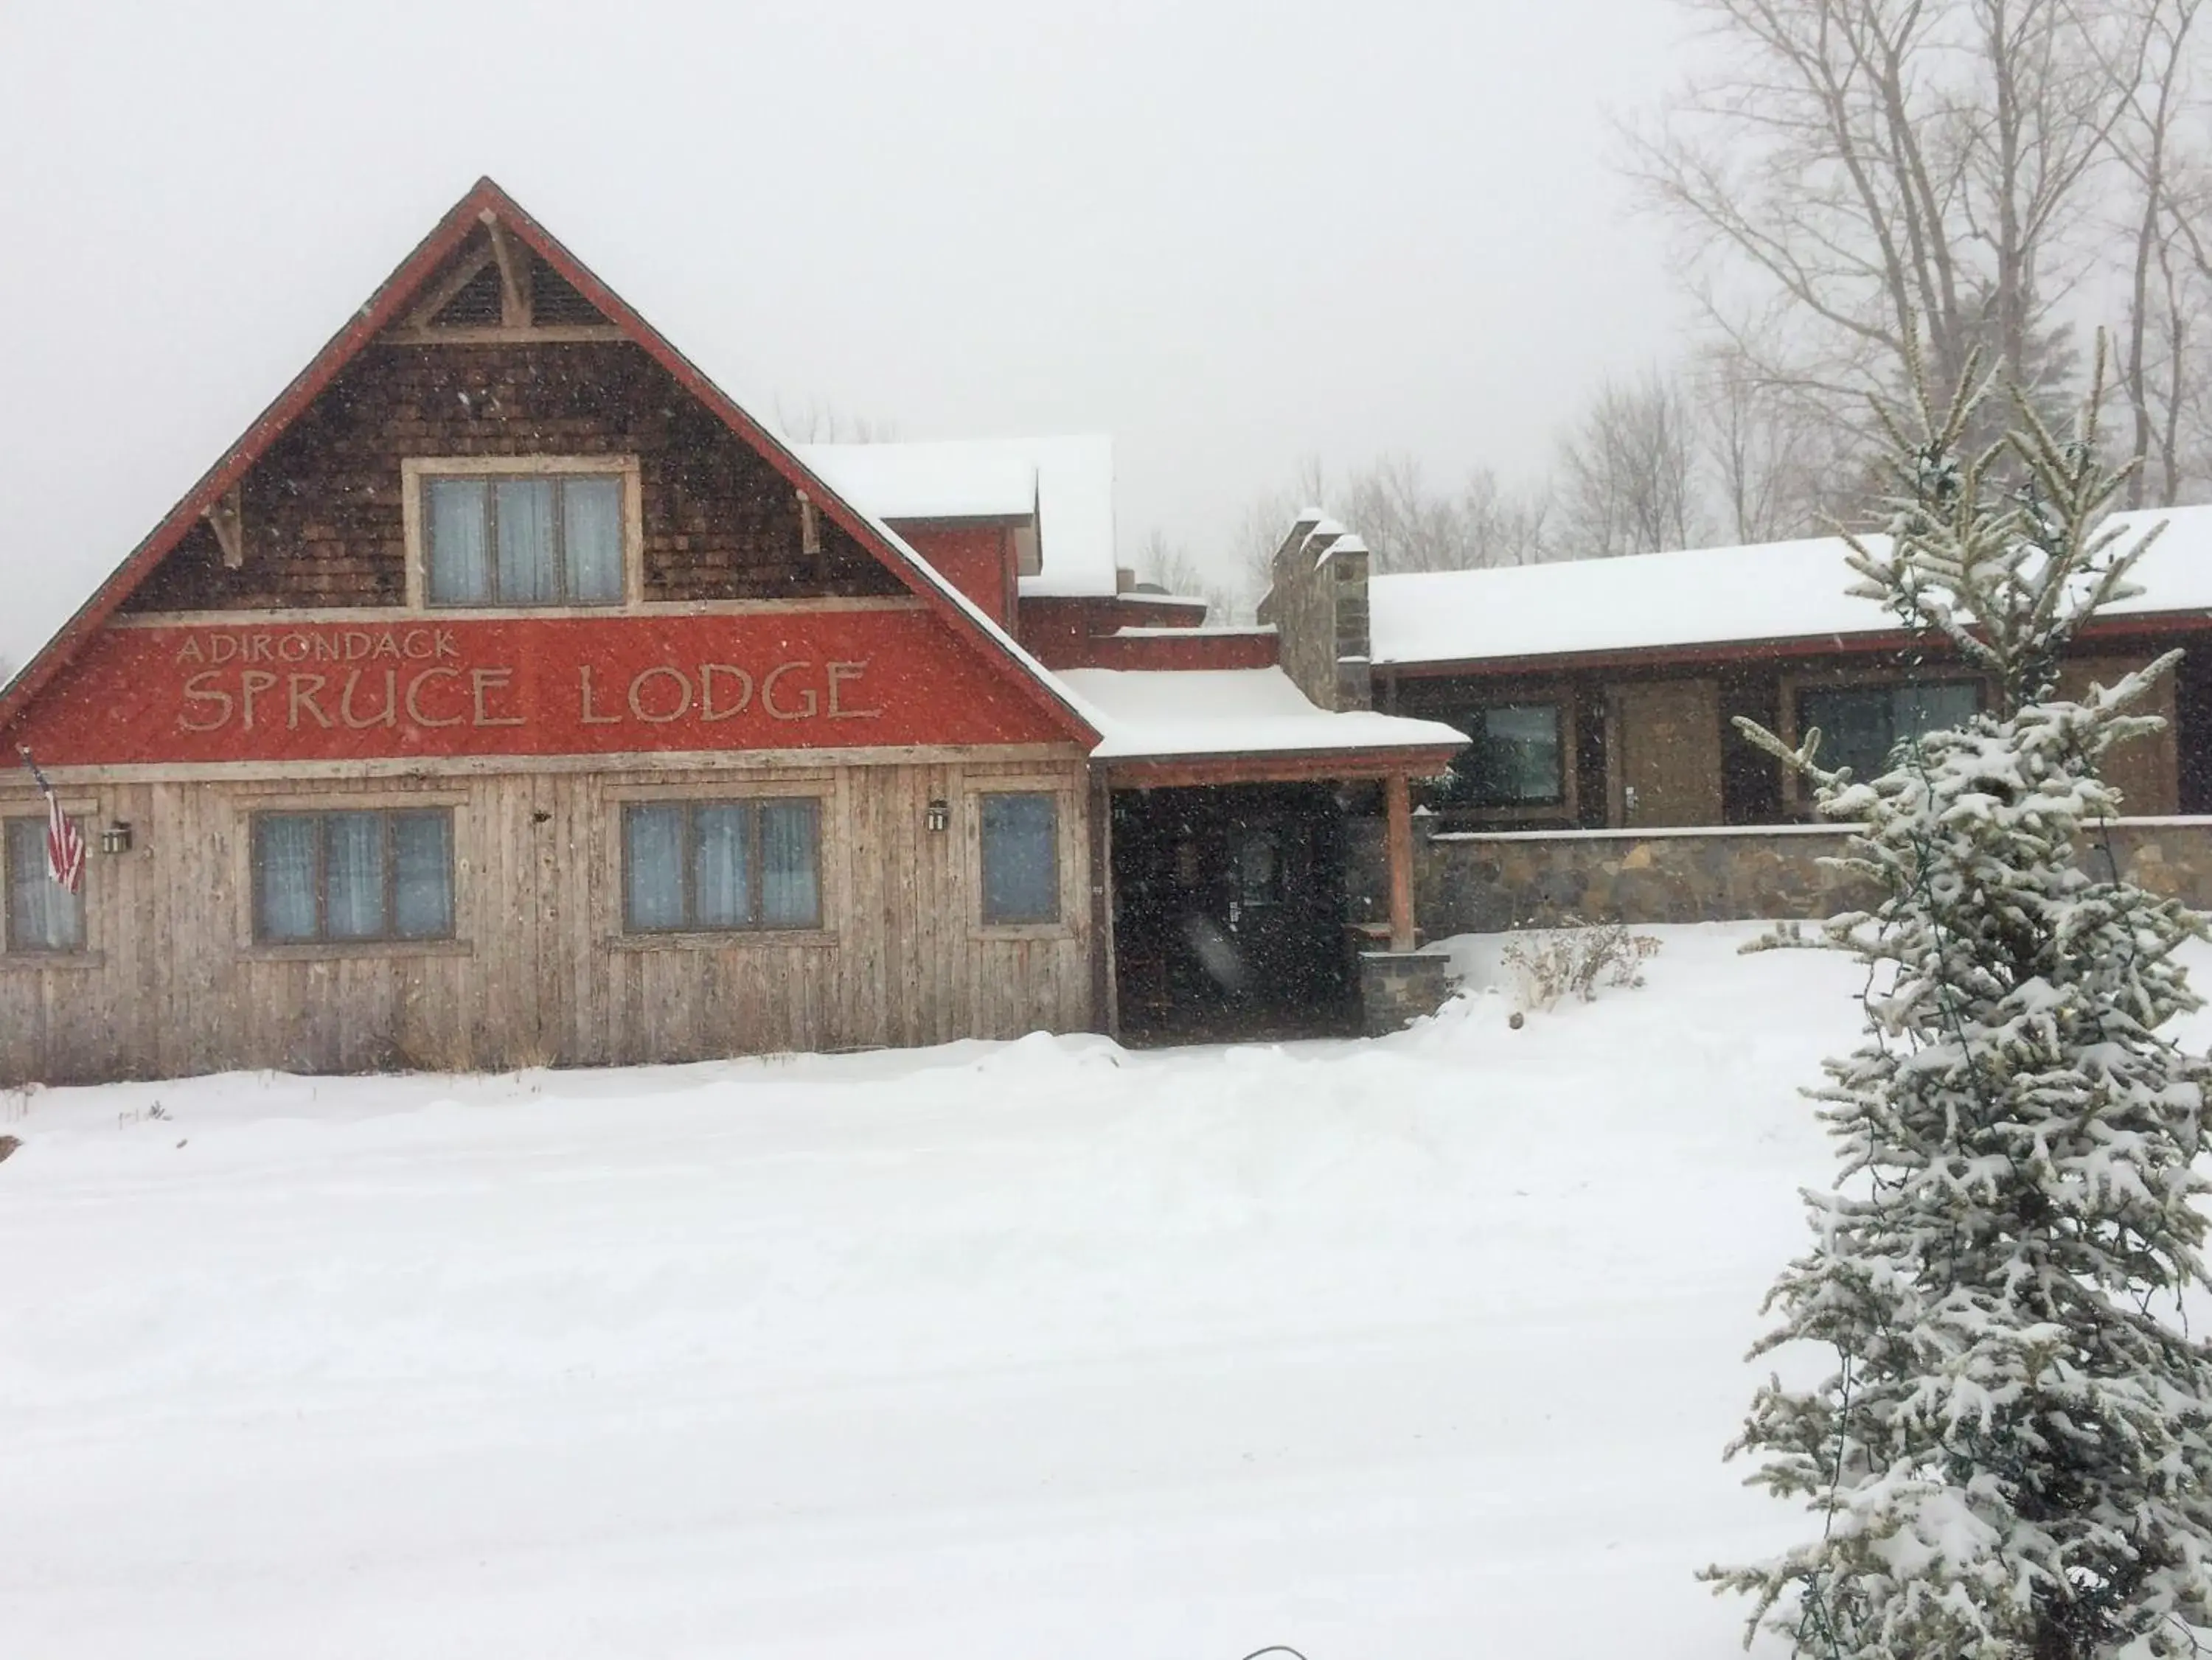 Property building, Winter in Adirondack Spruce Lodge